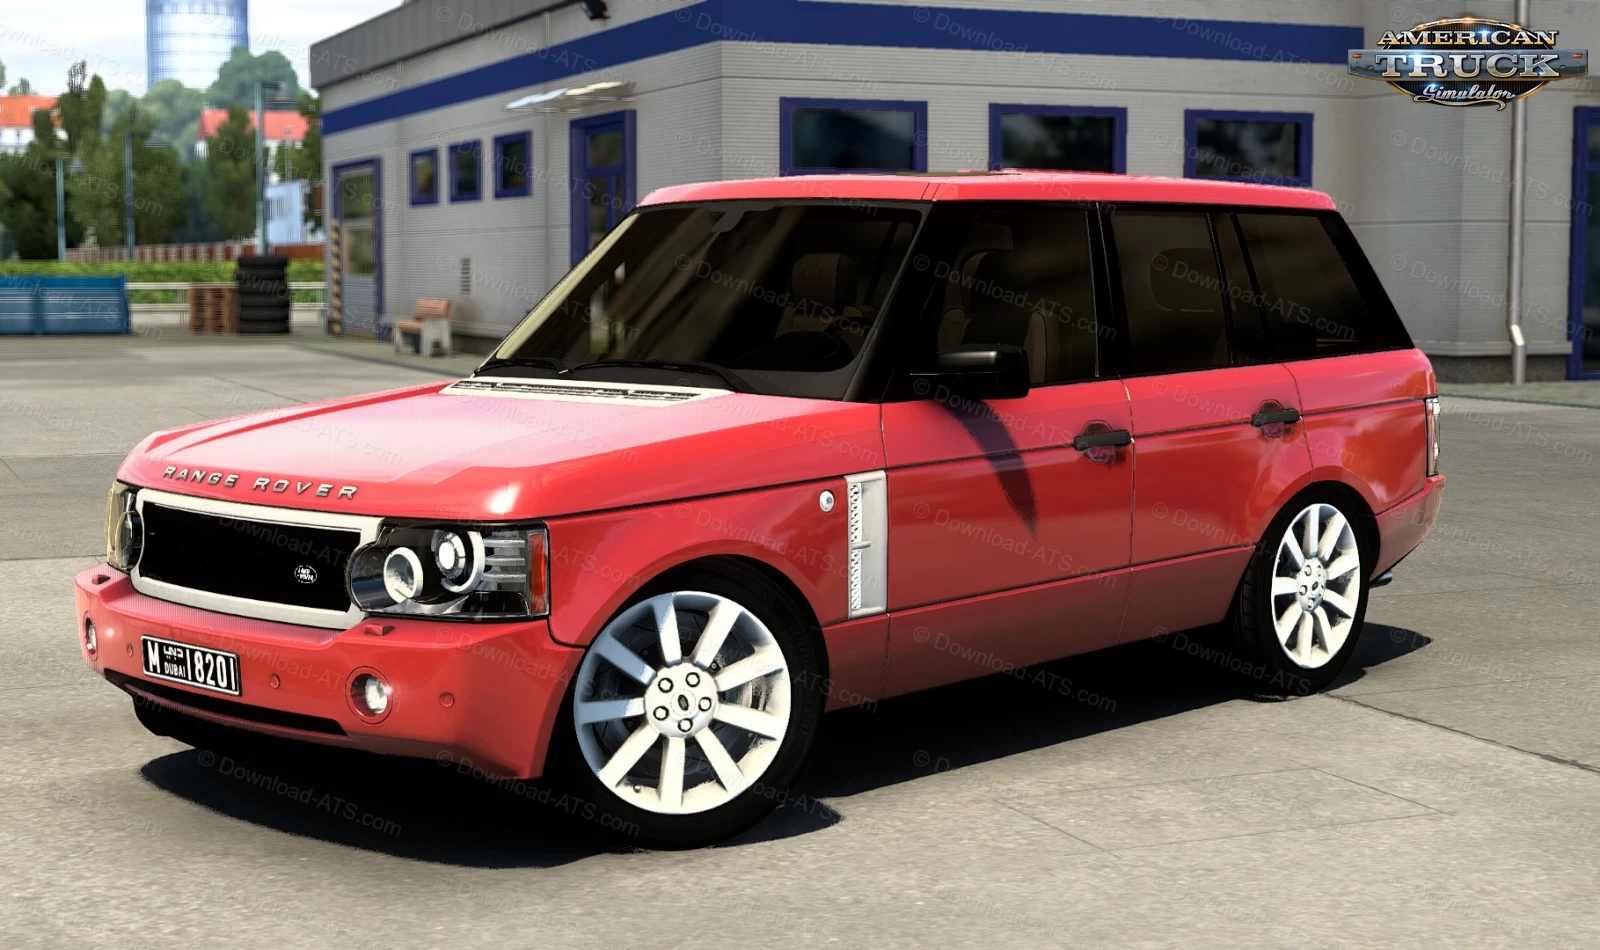 Range Rover Supercharged 2008 v7.6 (1.48.x) for ATS